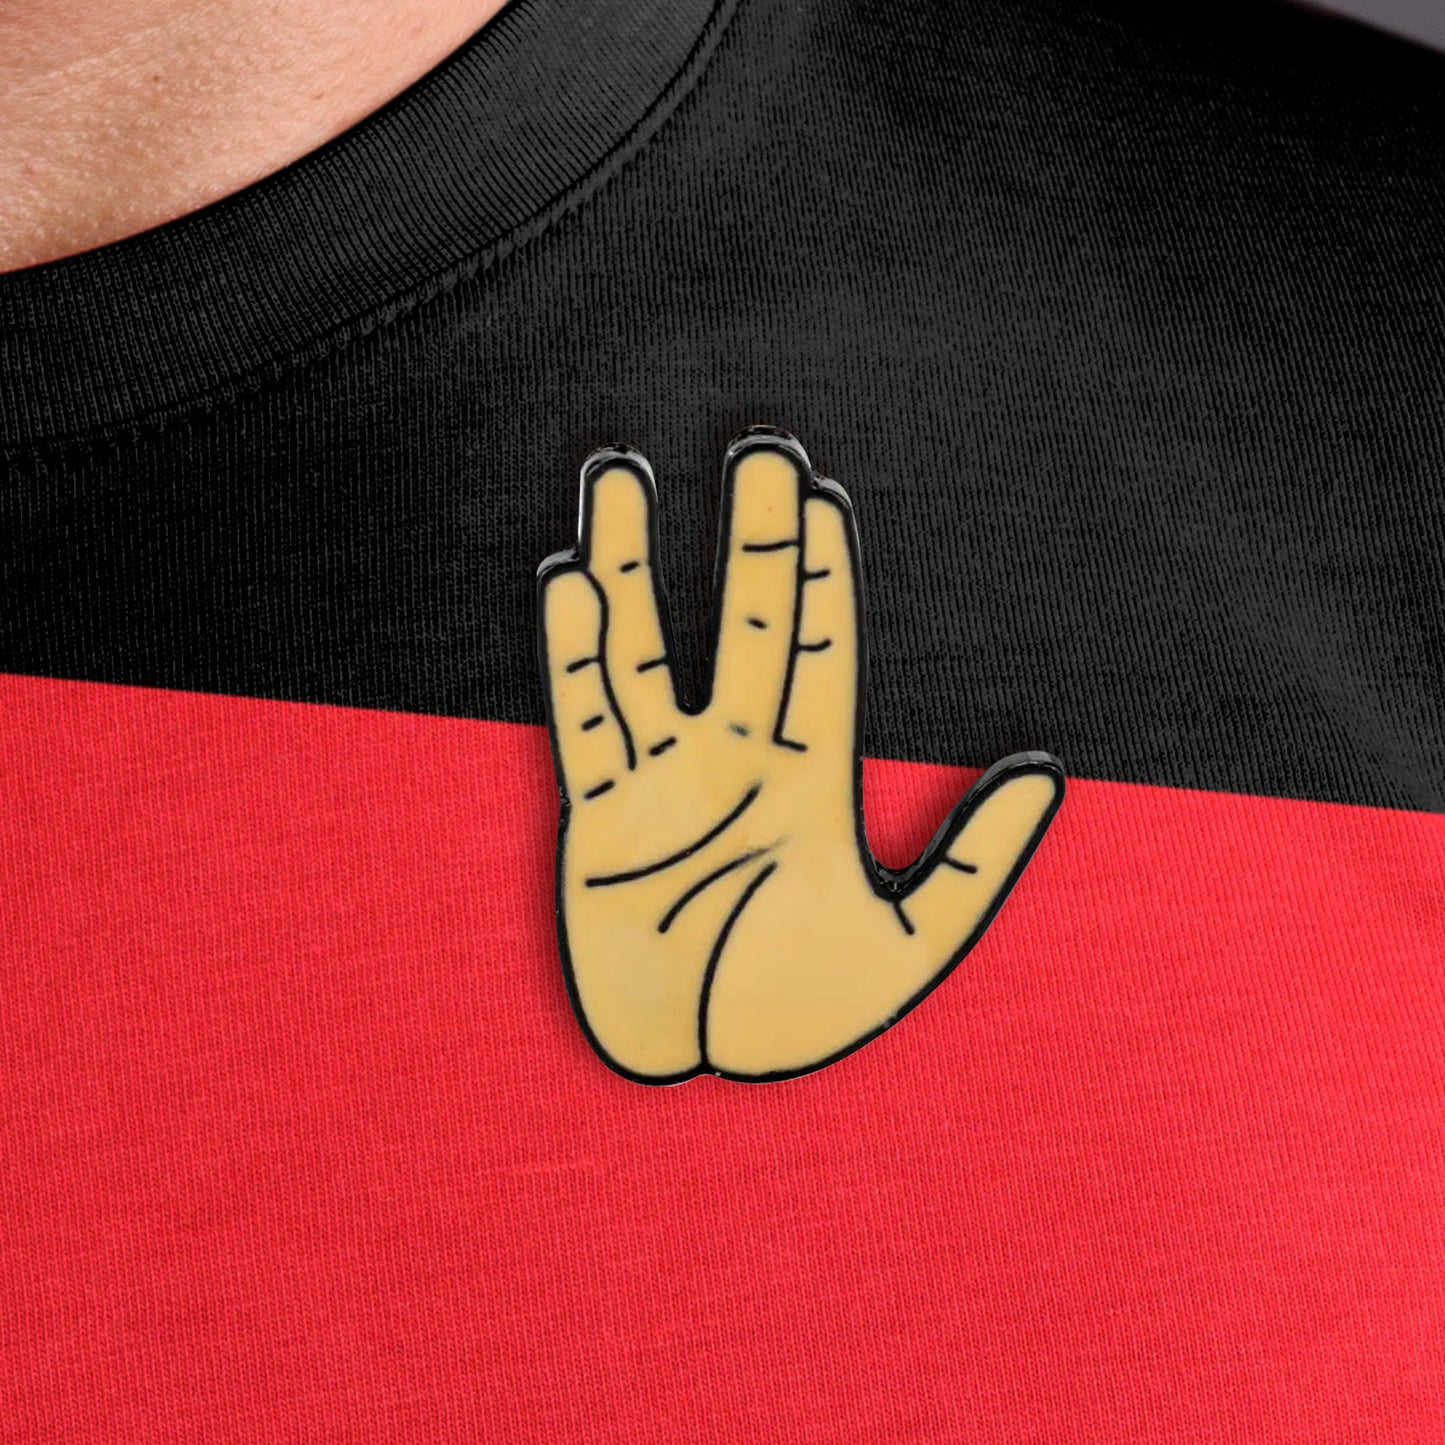 Close up of an enamel pin in the shape of the Vulcan Salute, attached to a red and black shirt. The Salute depicts an upright hand, with the fingers split into a V shape.